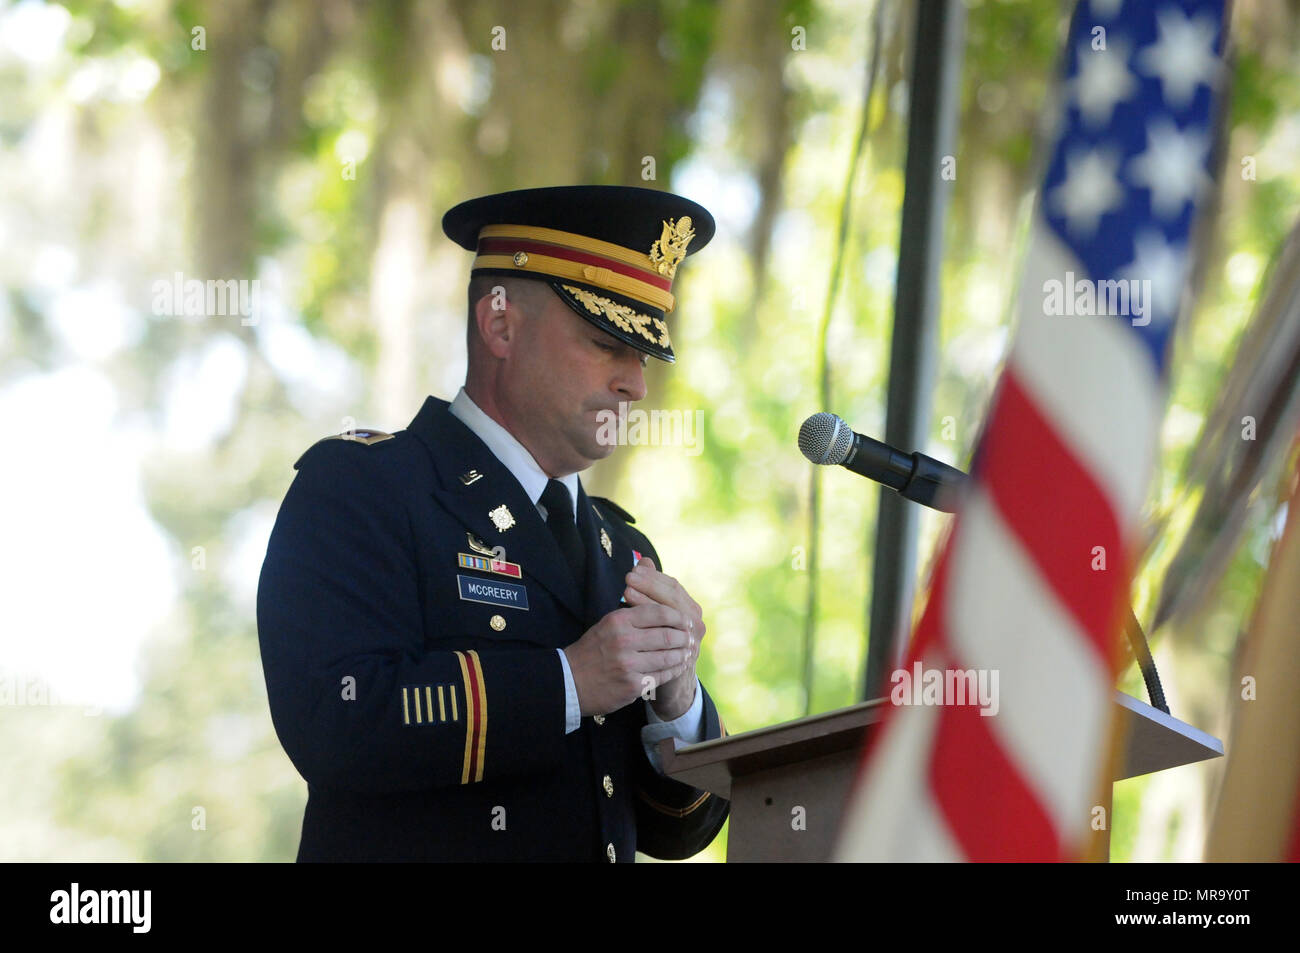 Lt. Col. Chris McCreery, commander of the 87th Combat Sustainment Support Battalion, 3rd Infantry Division Sustainment Brigade, pauses during a speech at the Richmond Hill, Ga., Memorial Day Observance at J.F. Gregory Park in Richmond Hill, May 29. During his speech, Mcreery spoke about a group of Soldiers he’d known who were killed in an IED attack while serving in Iraq. (U.S. Army photo by Sgt. 1st Class Ben K. Navratil) Stock Photo